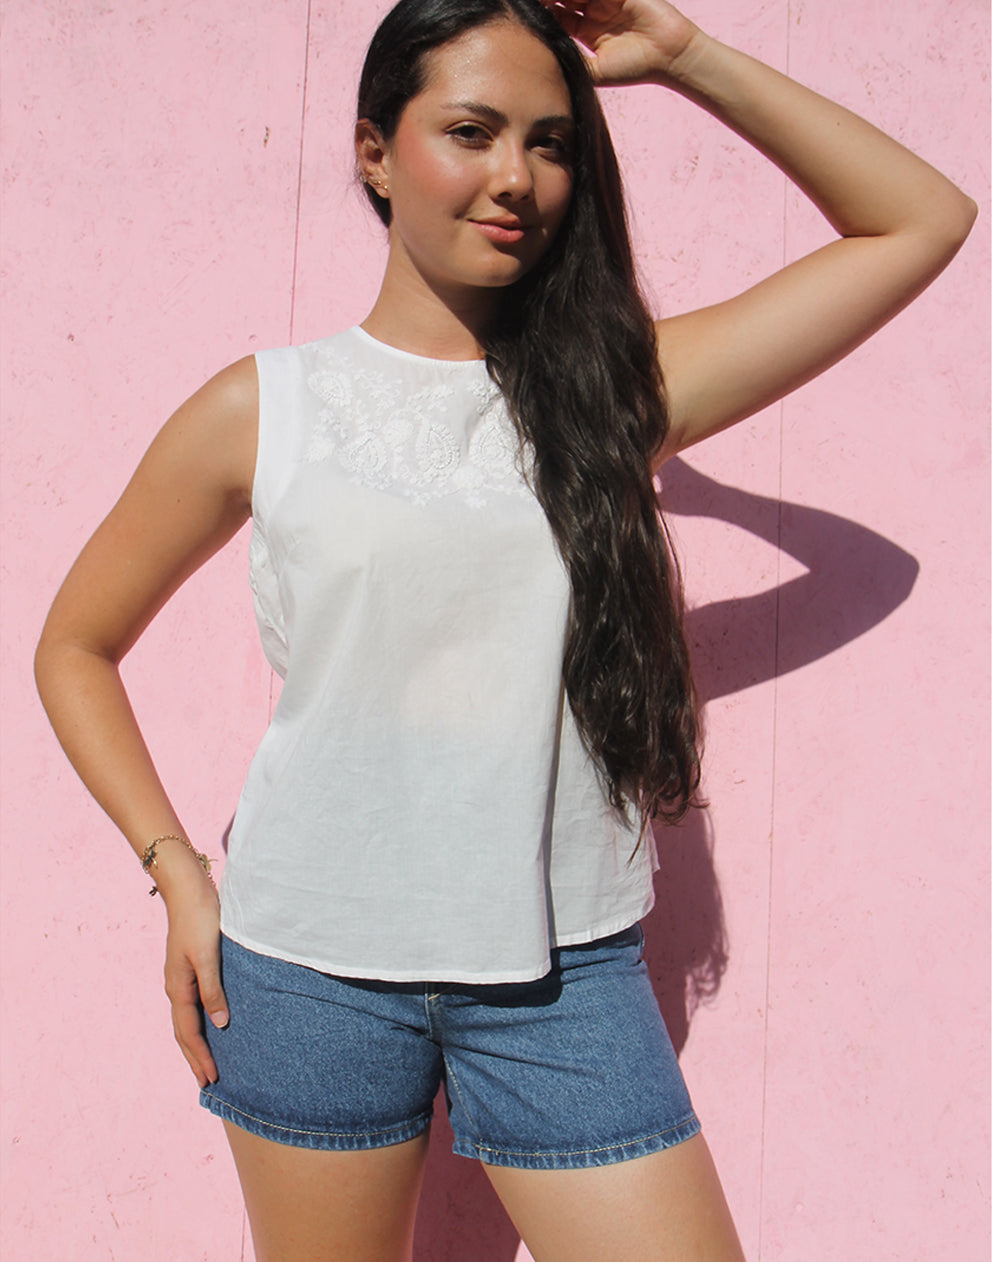 White Cotton Top with Embroidery